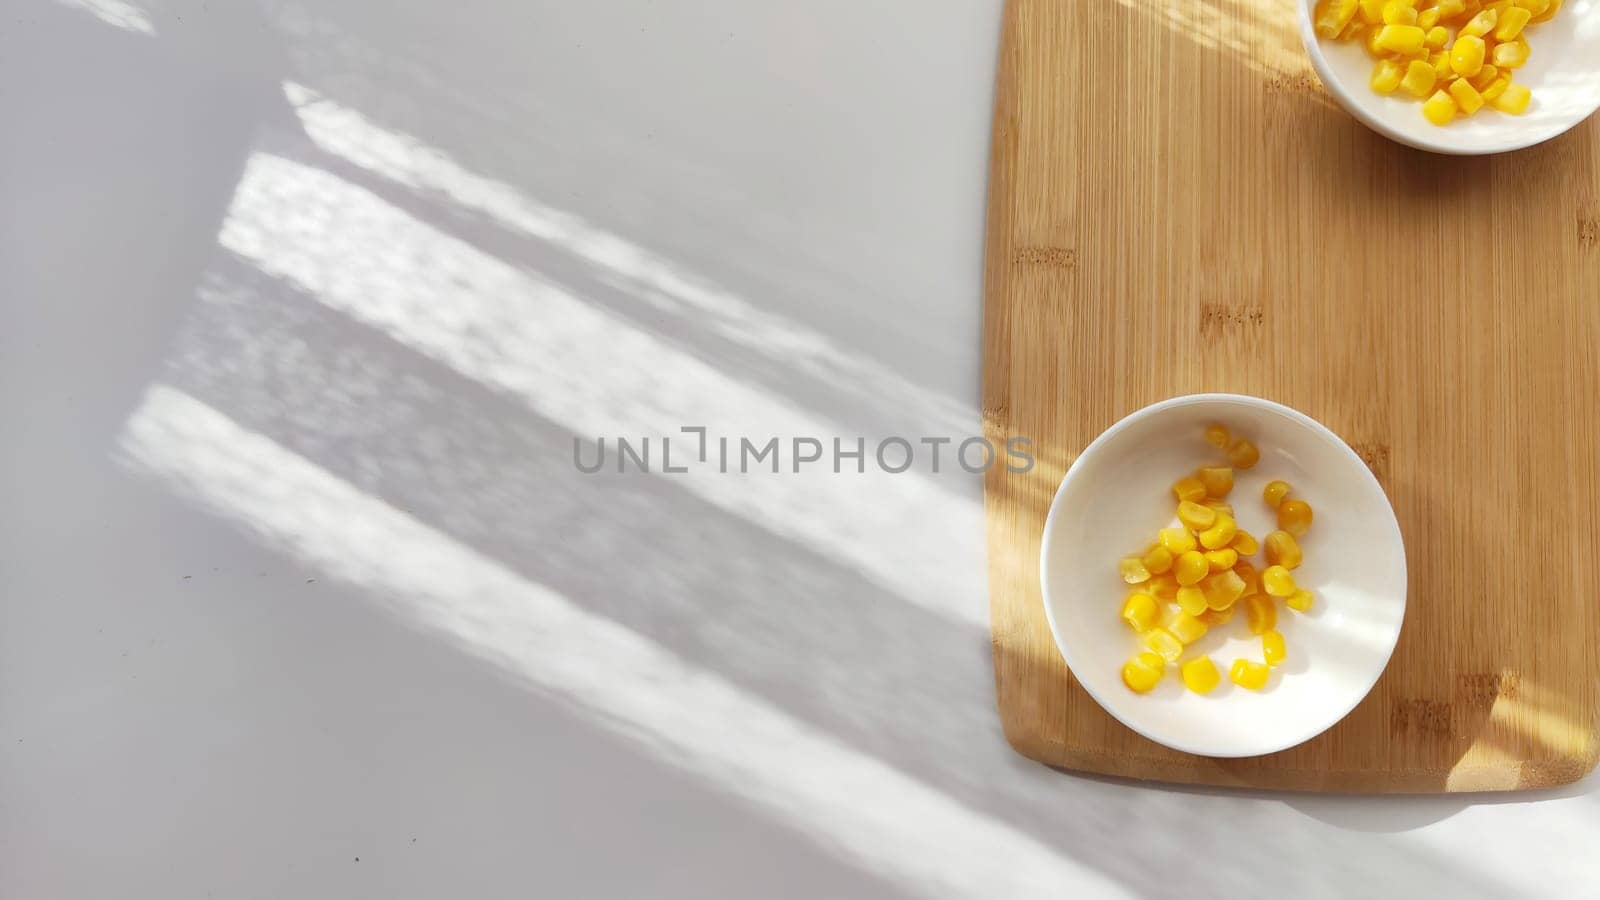 Lot of pieces of canned yellow corn on plate which is on wooden bamboo cutting board on white background. The concept of cooking and delicious healthy food by keleny